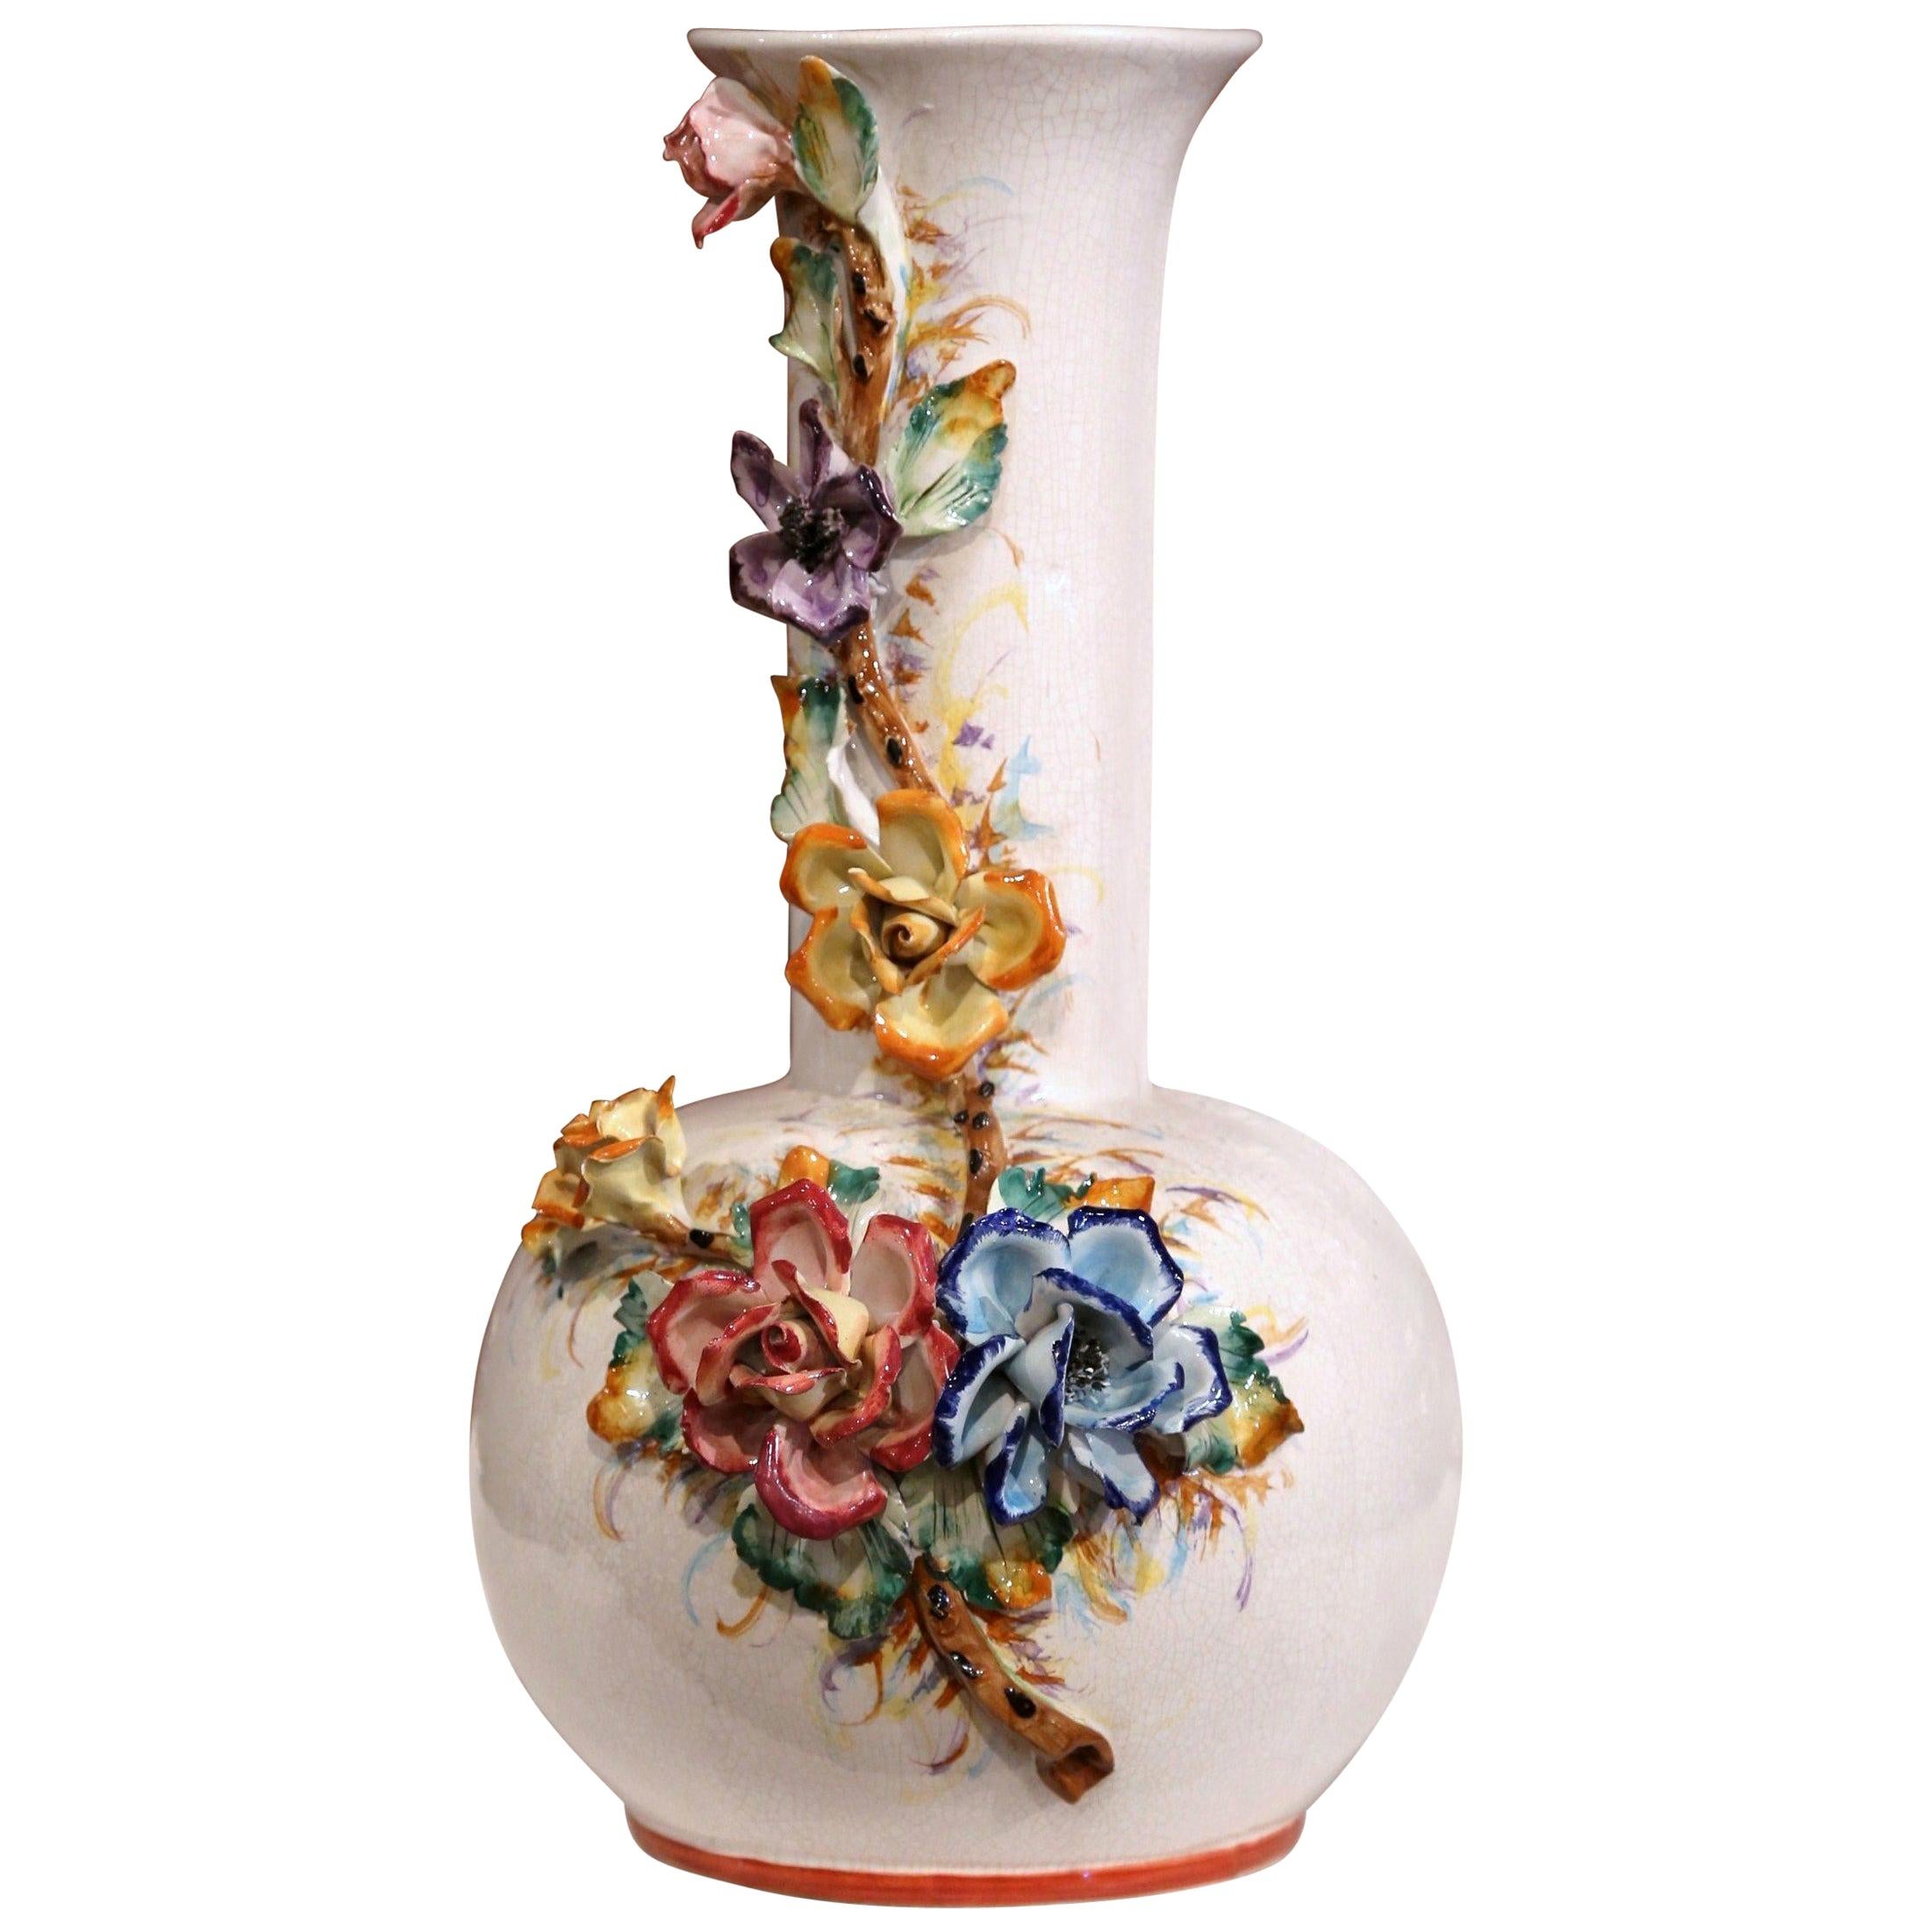 Large Early 20th Century French Hand Painted Barbotine Vase with Flowers